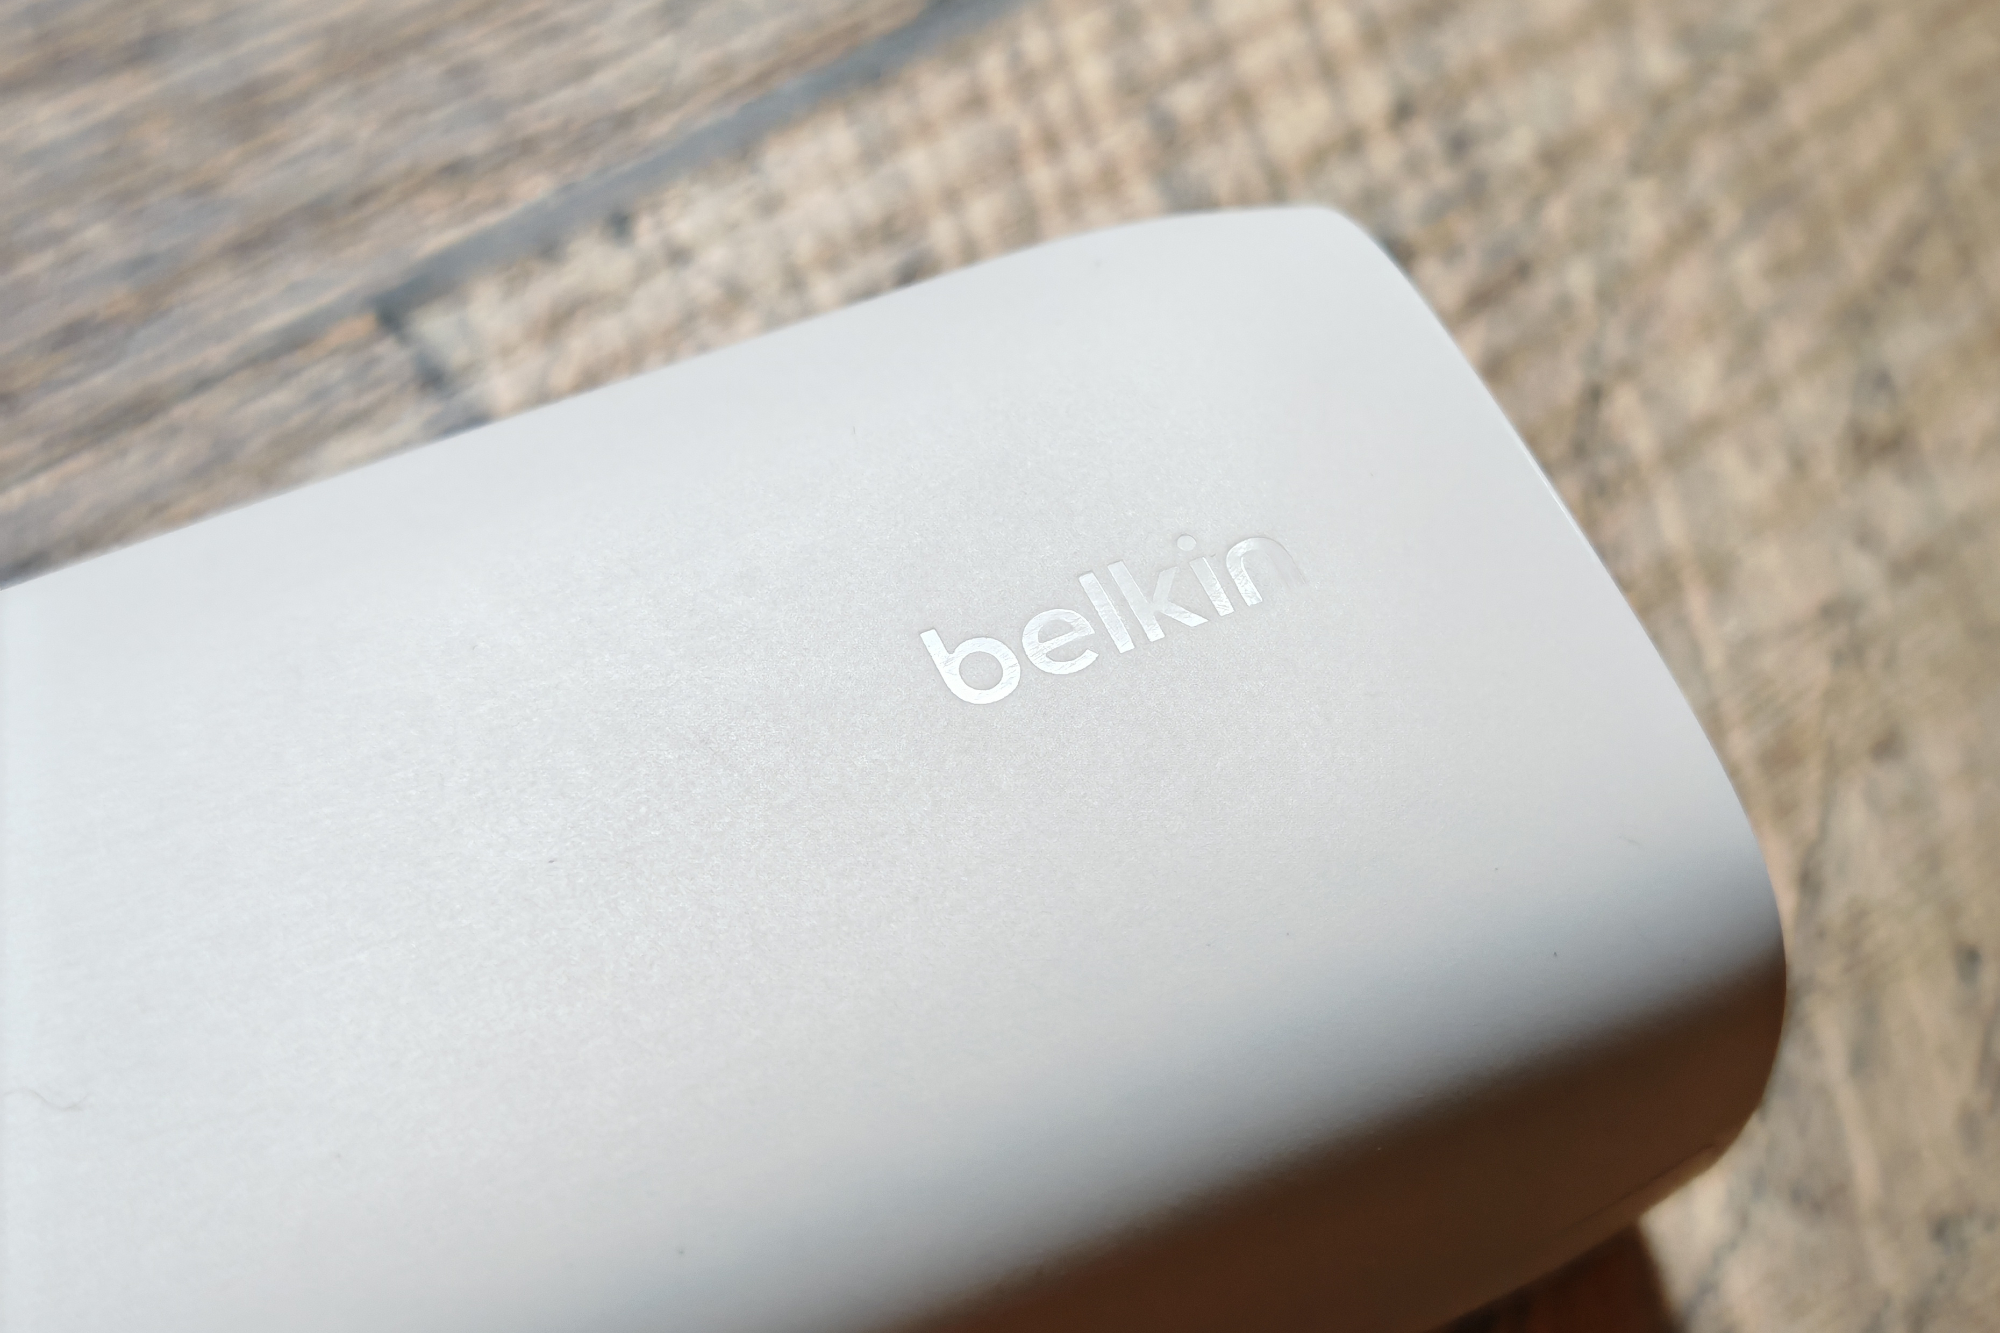 The Belkin logo on a white charger.